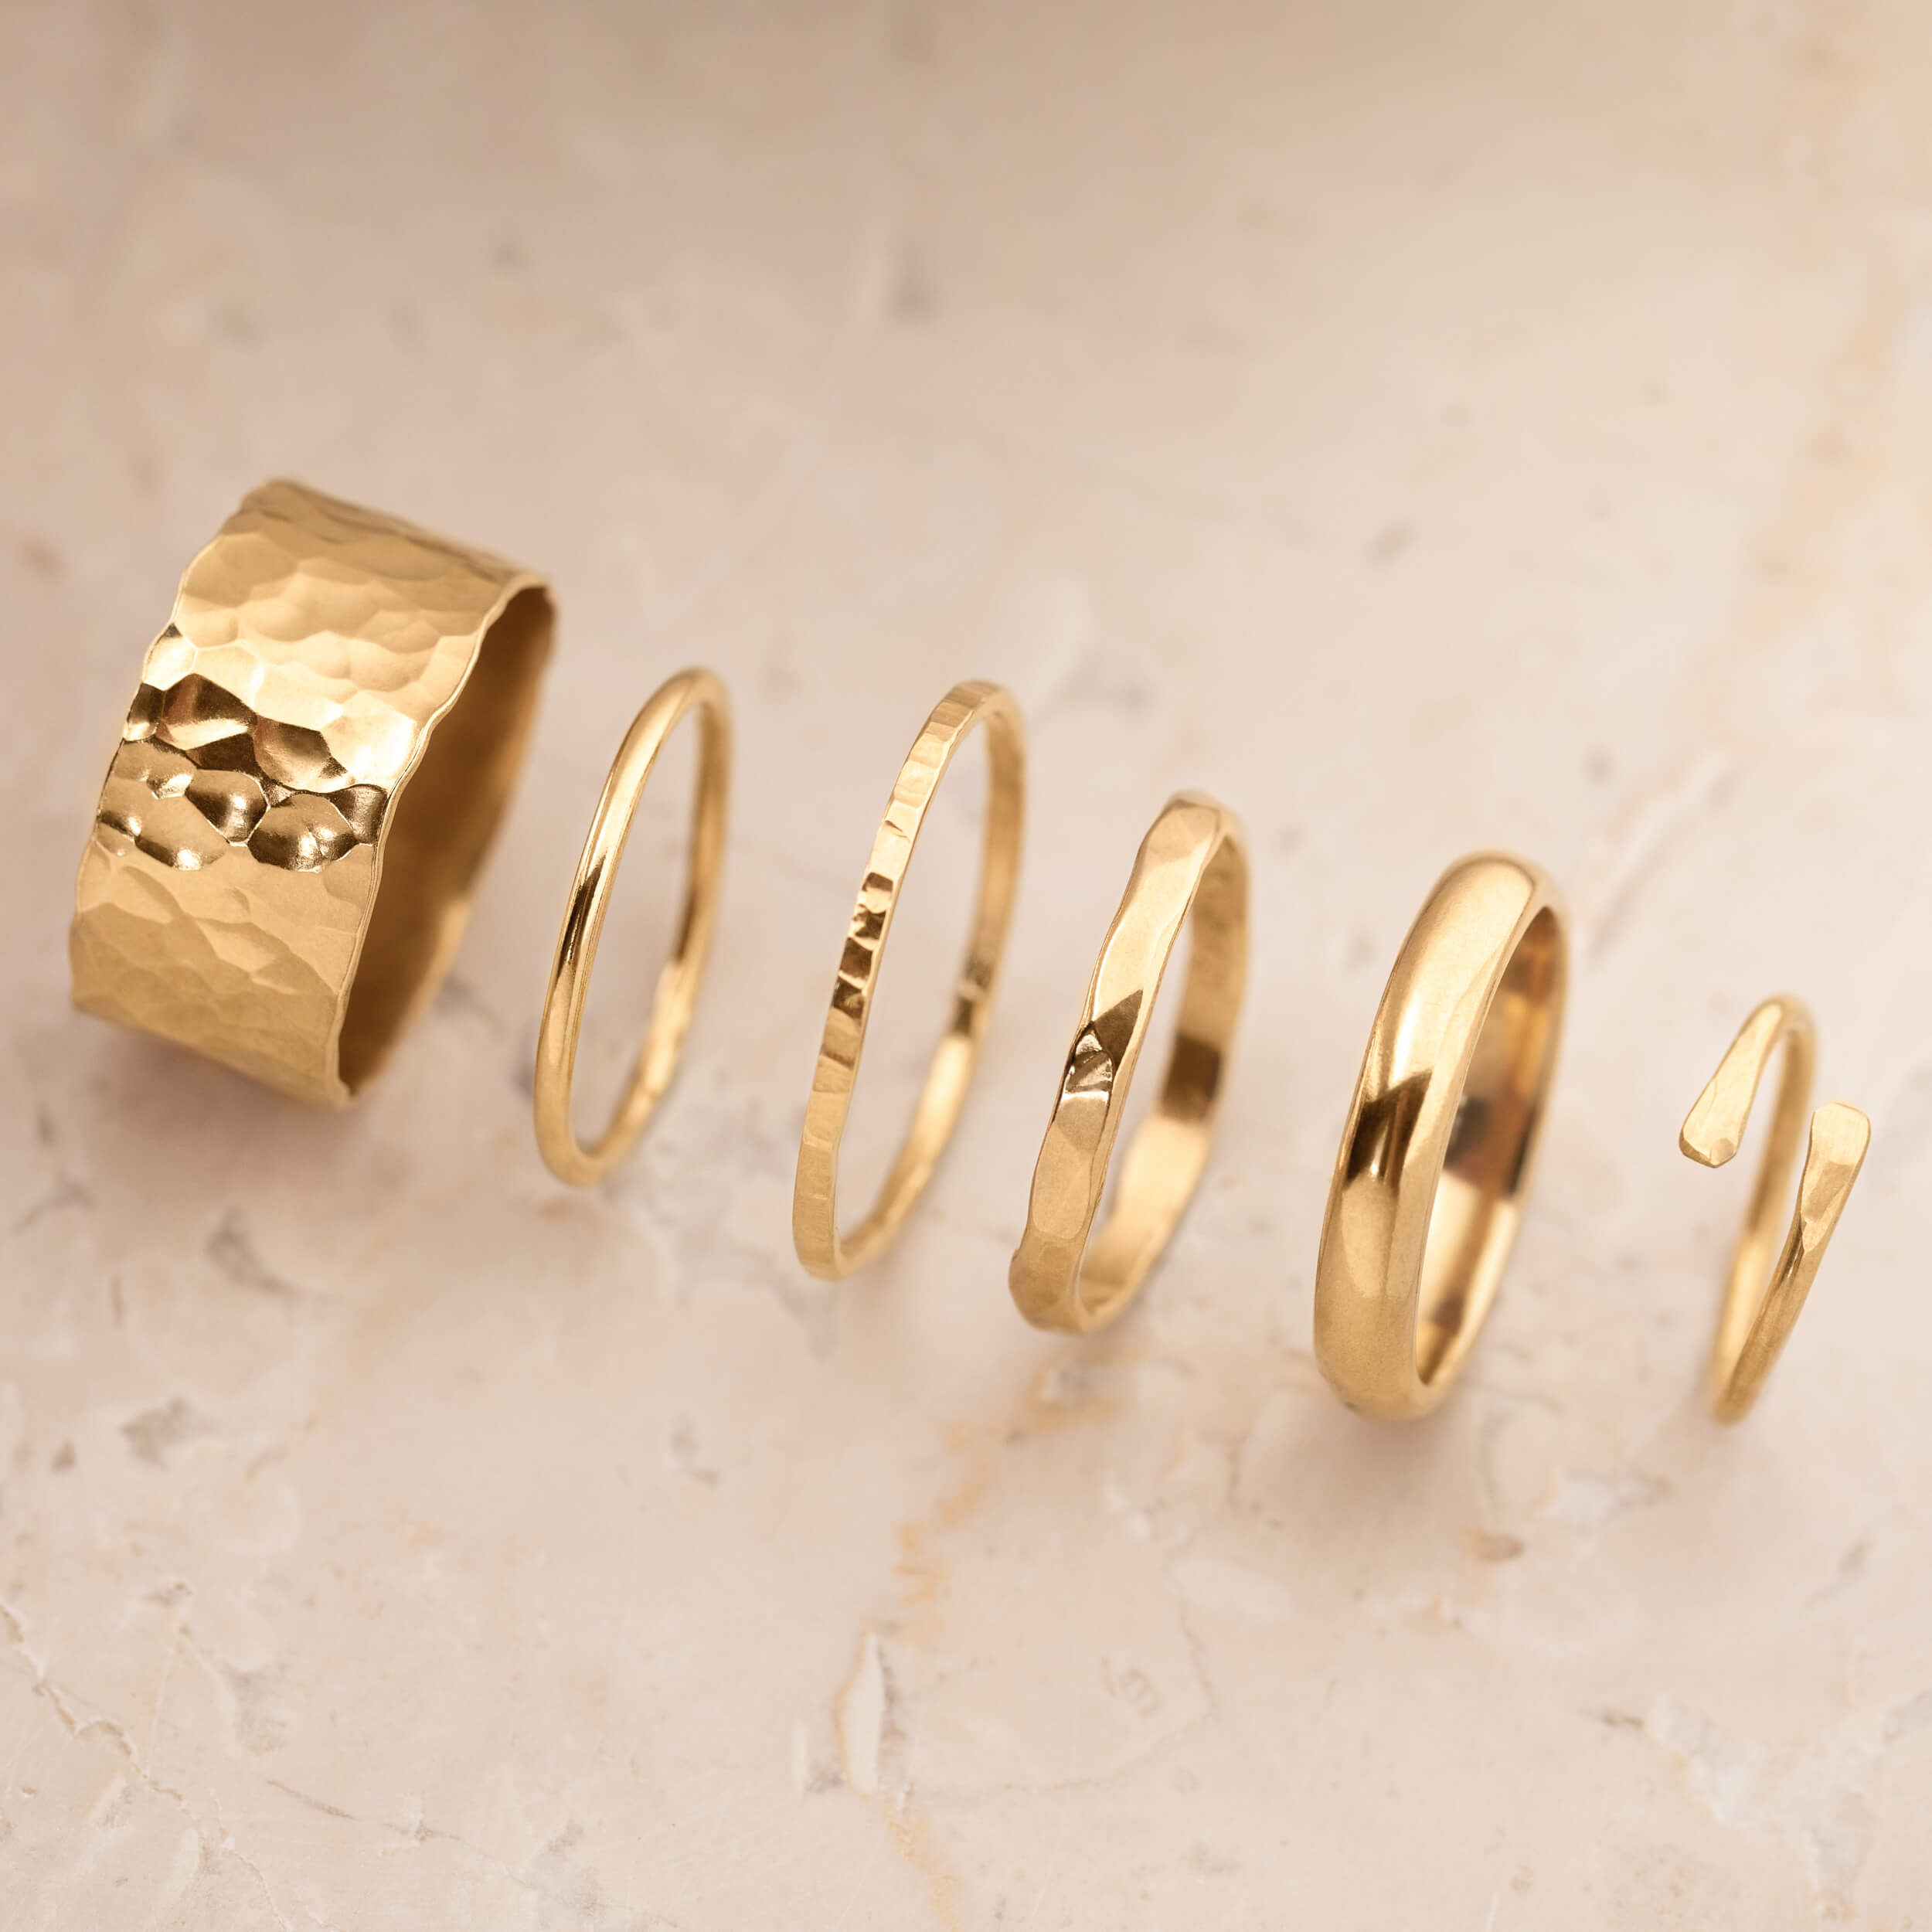 gold hammered ring, gold smooth skinny ring, ejd, stacking rings, gold plated rings, gold vermeil rings